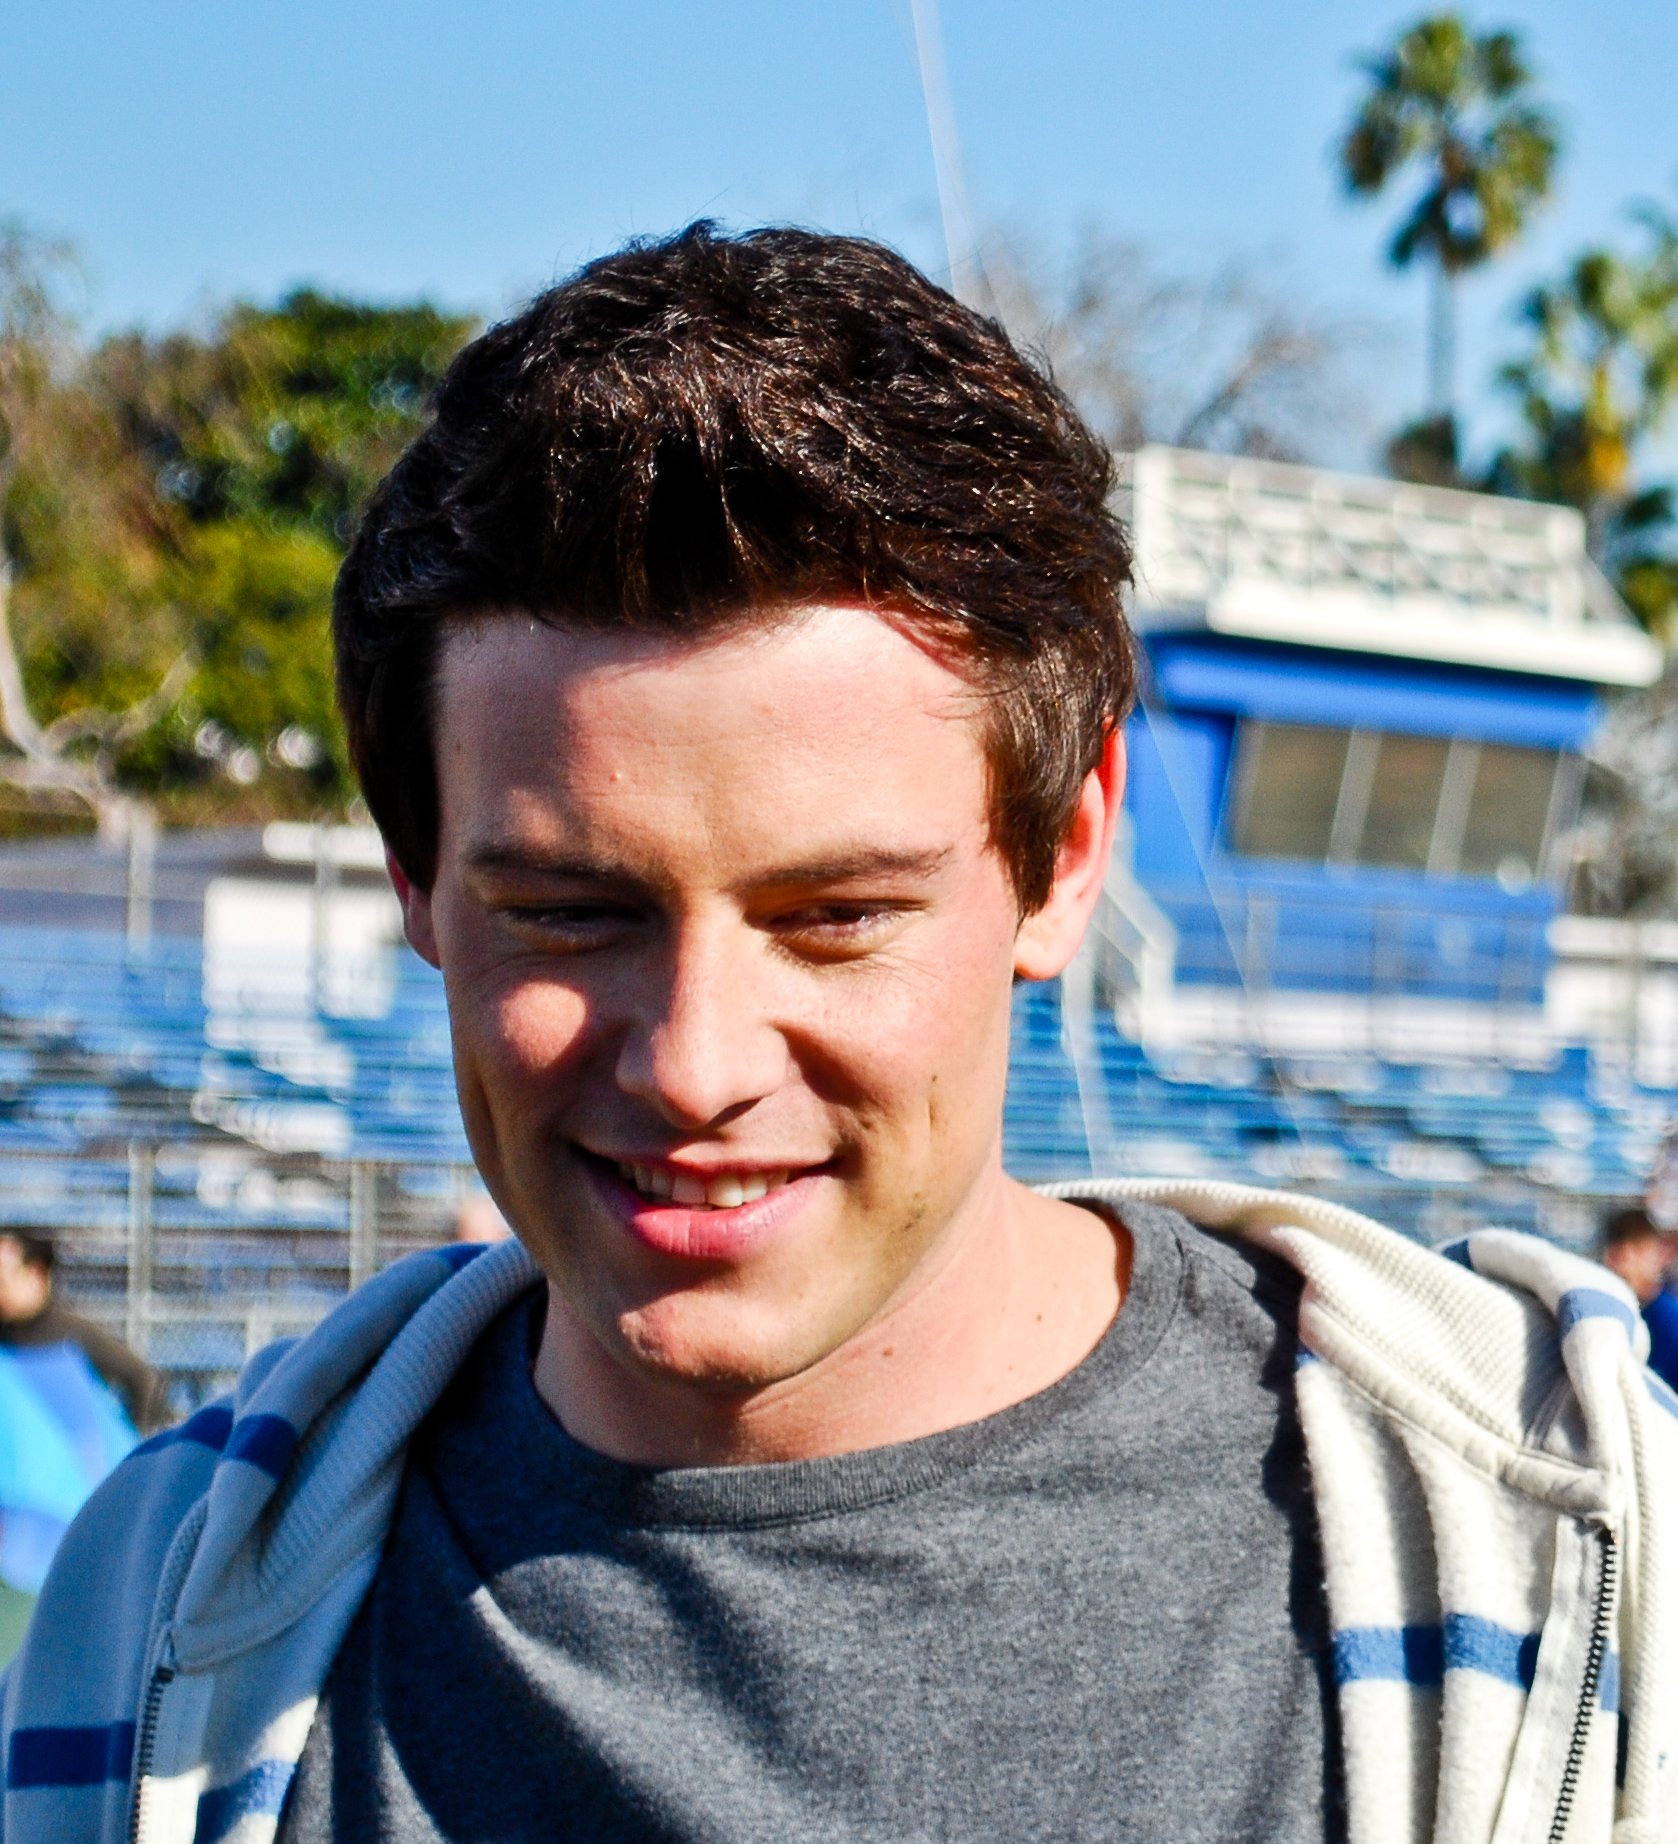 Cory Monteith at Venice High School Los Angeles, California, where Glee was filming a remake of Grease on  December 6, 2011 | Photo: WikiMedia